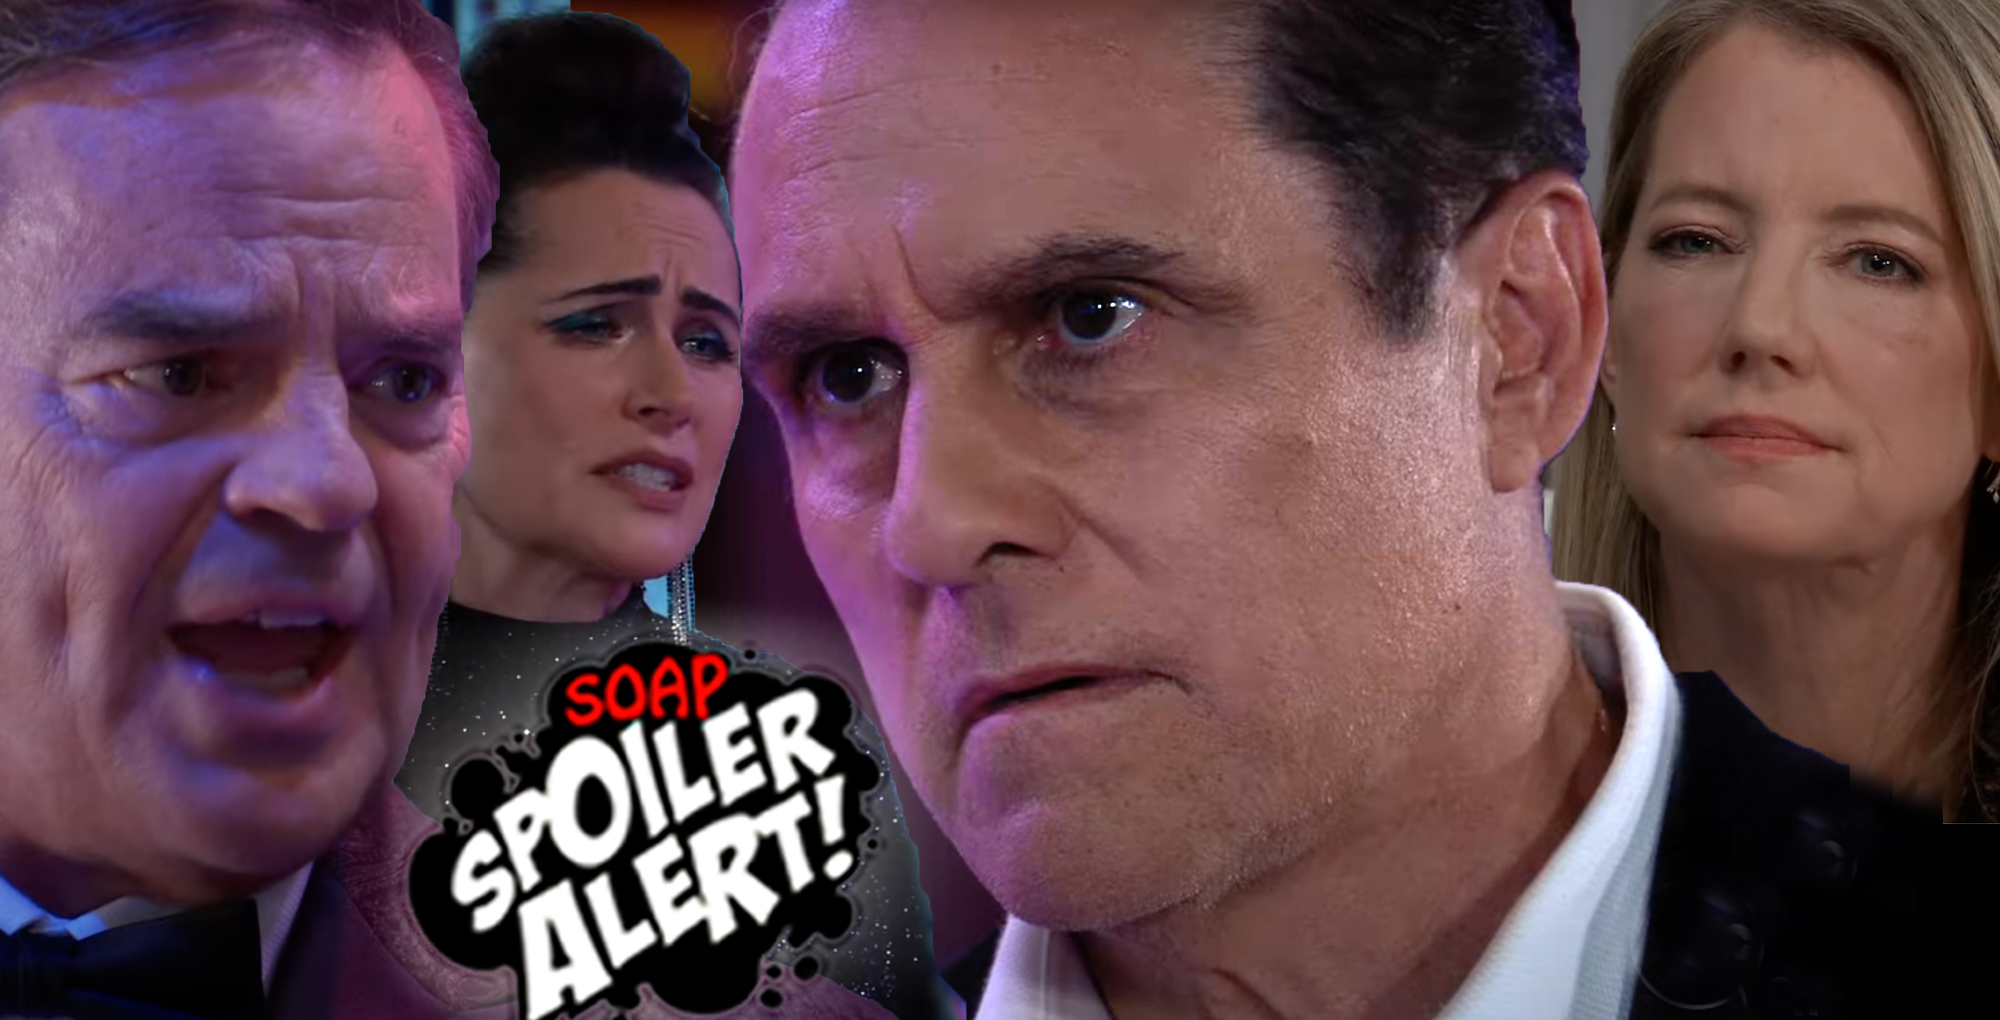 gh spoilers video collage of ned, lois, sonny, and nina in the background.